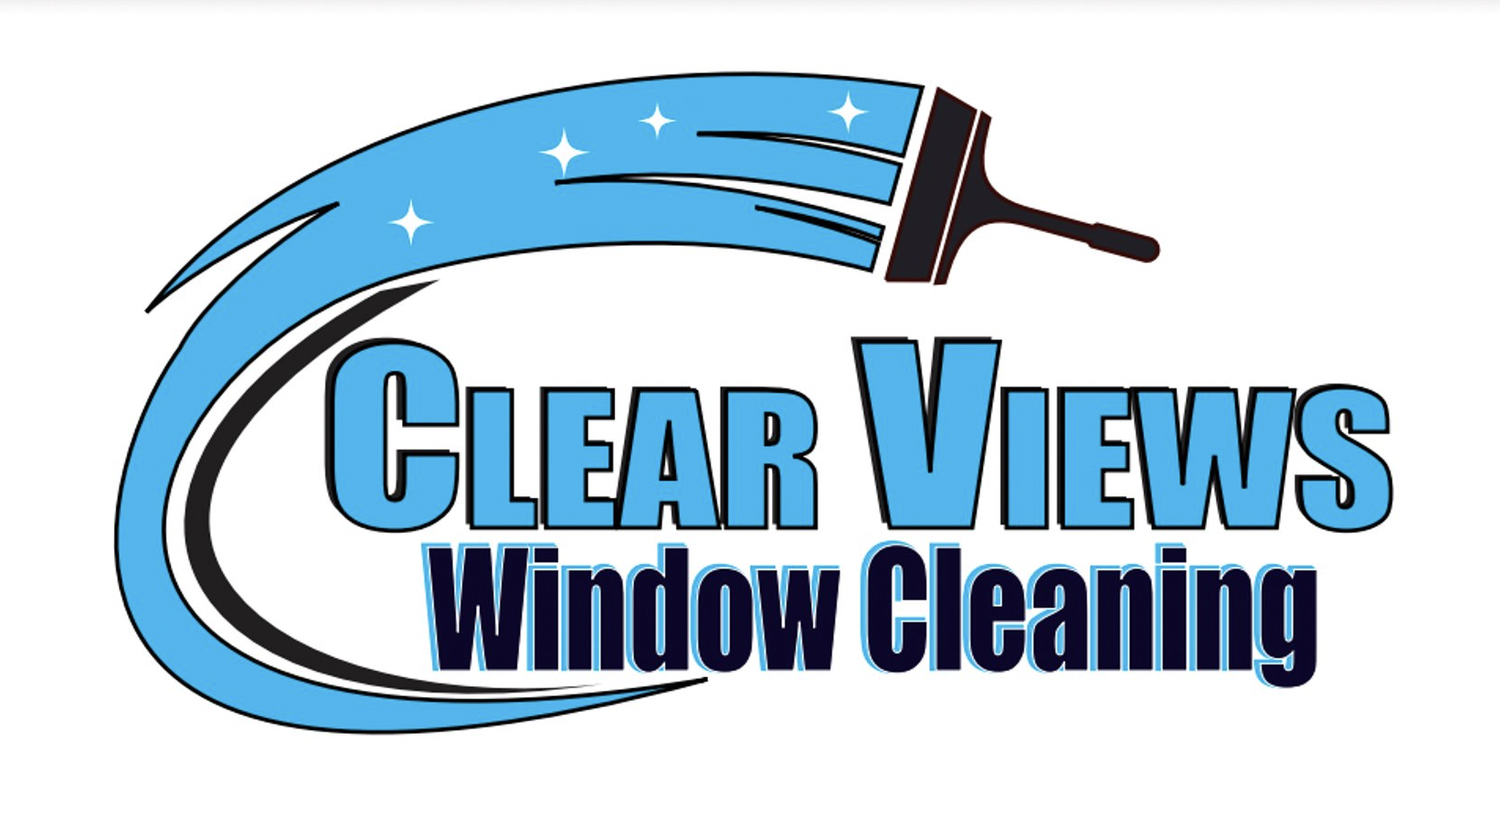 Clear Views Window Cleaning